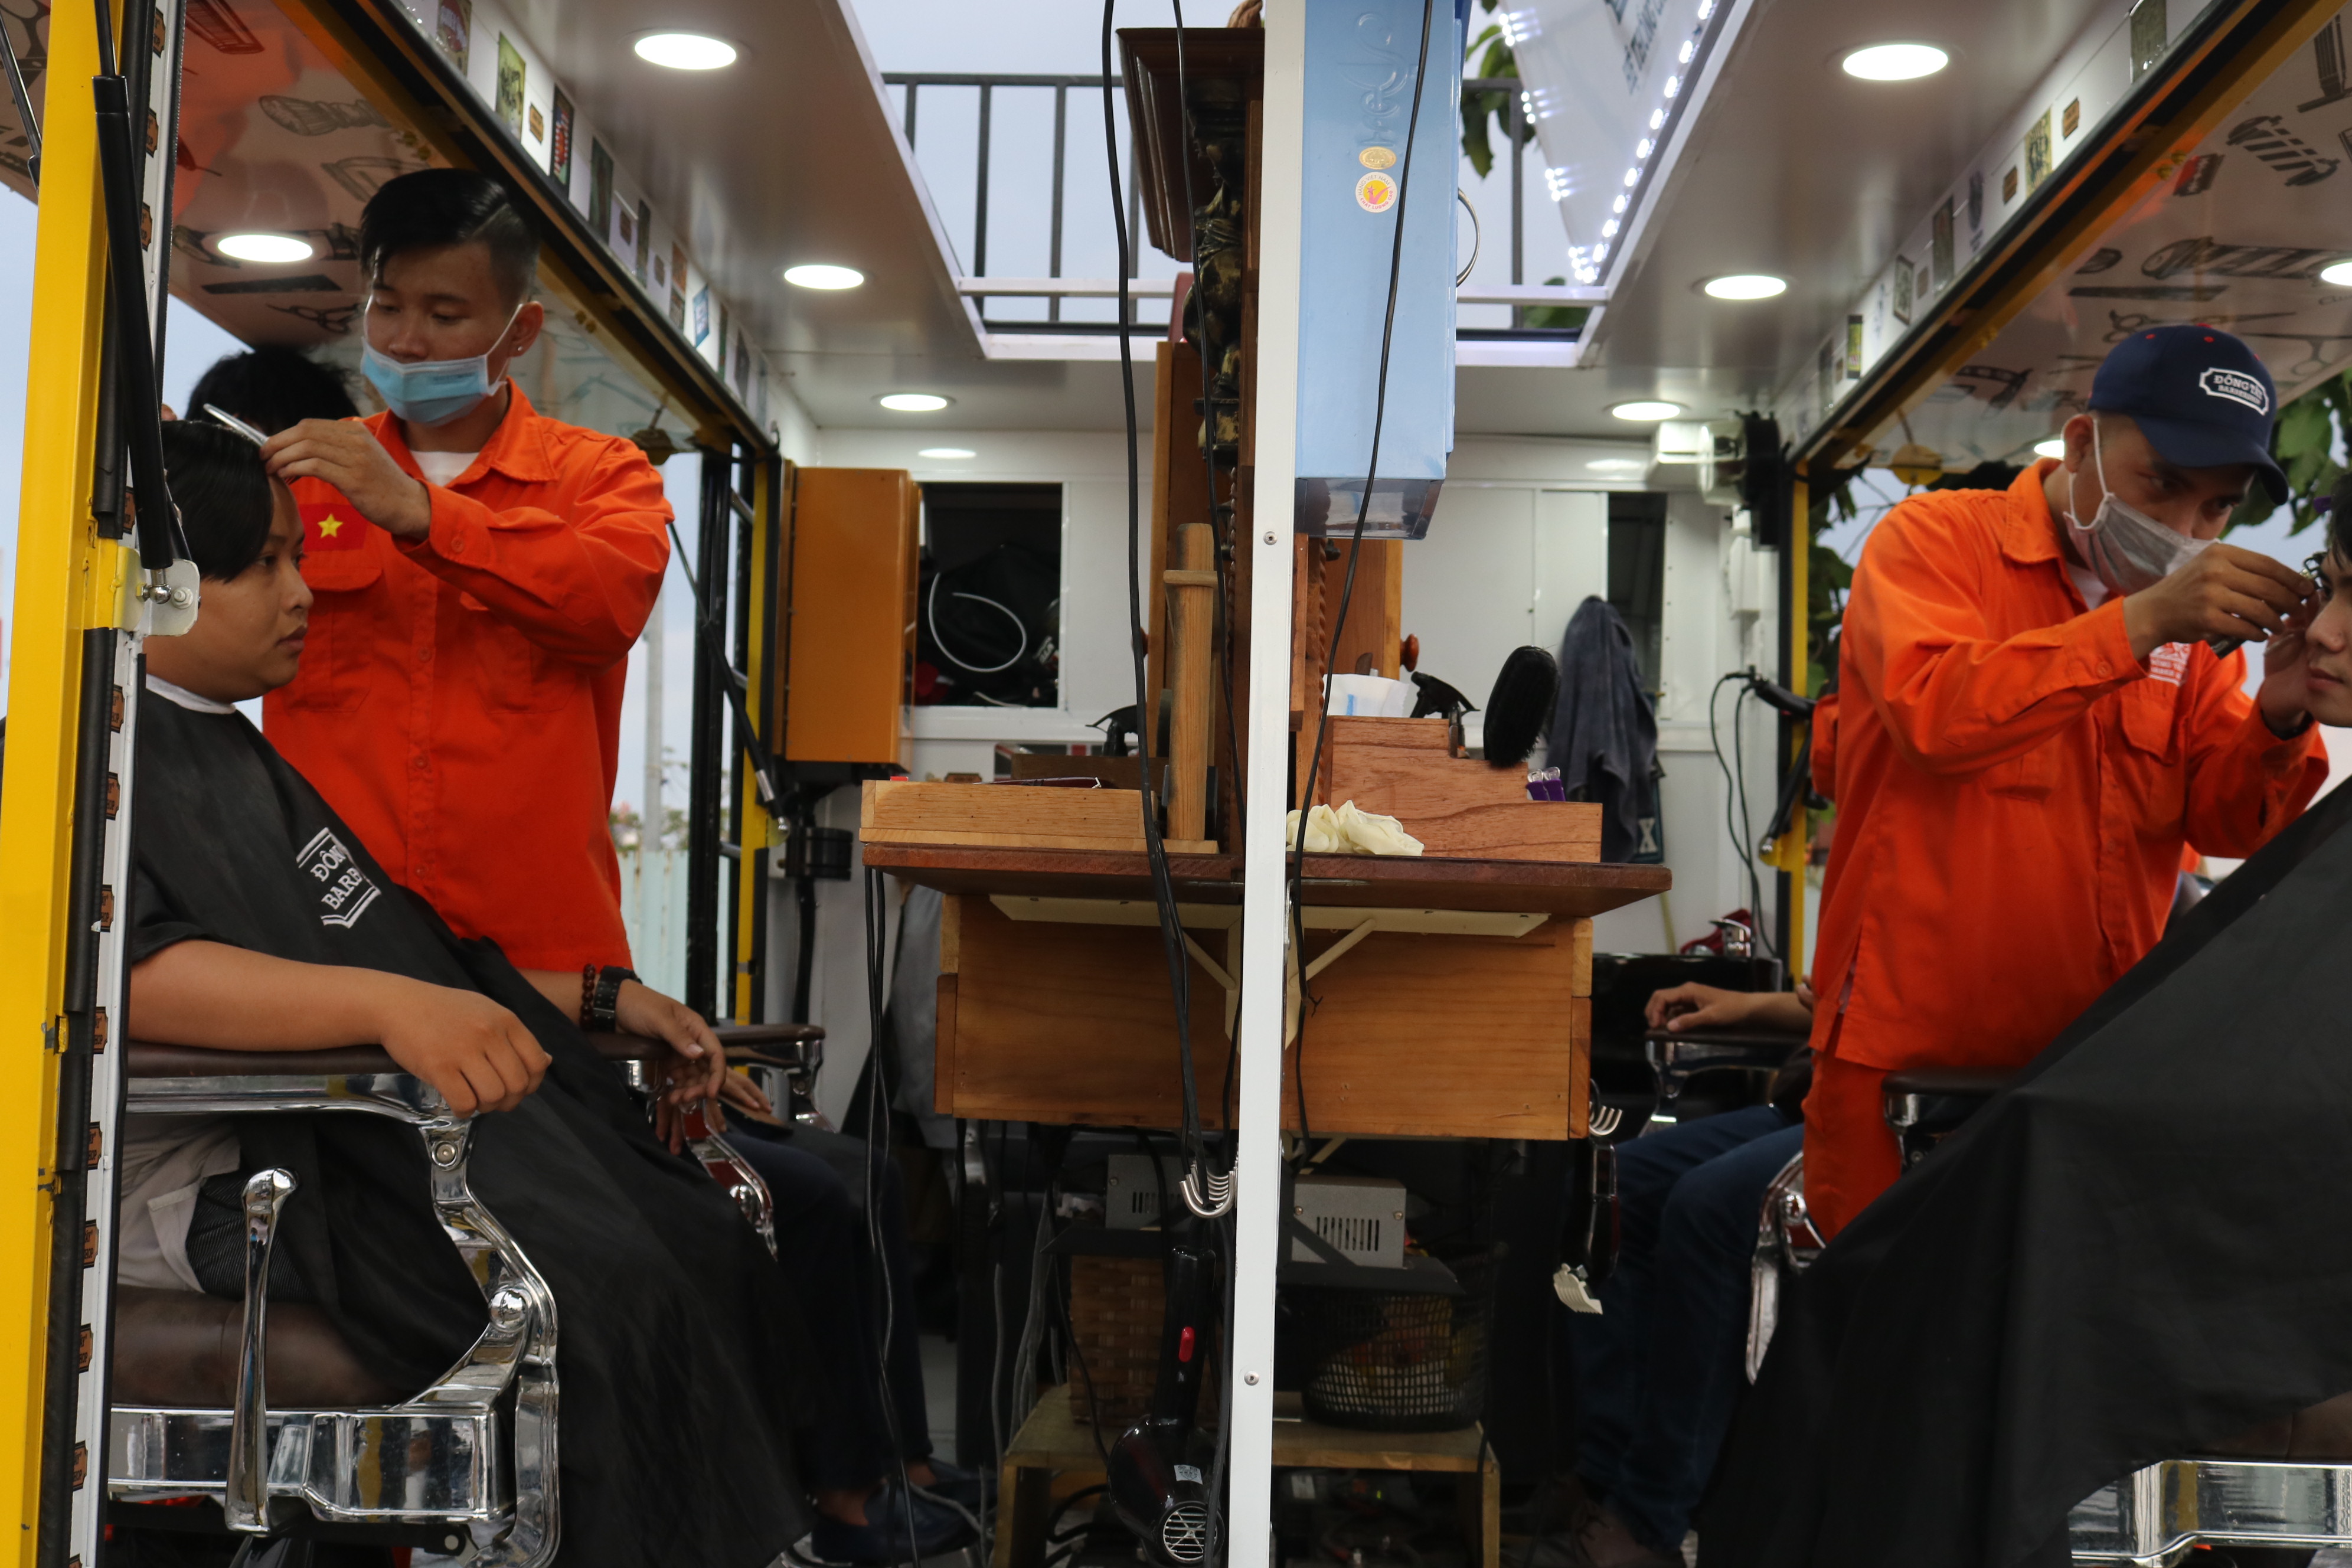 A close up to the mini hair salon of Dong Tay barber system at District 2, Ho Chi Minh City. Photo: Hoang An / Tuoi Tre